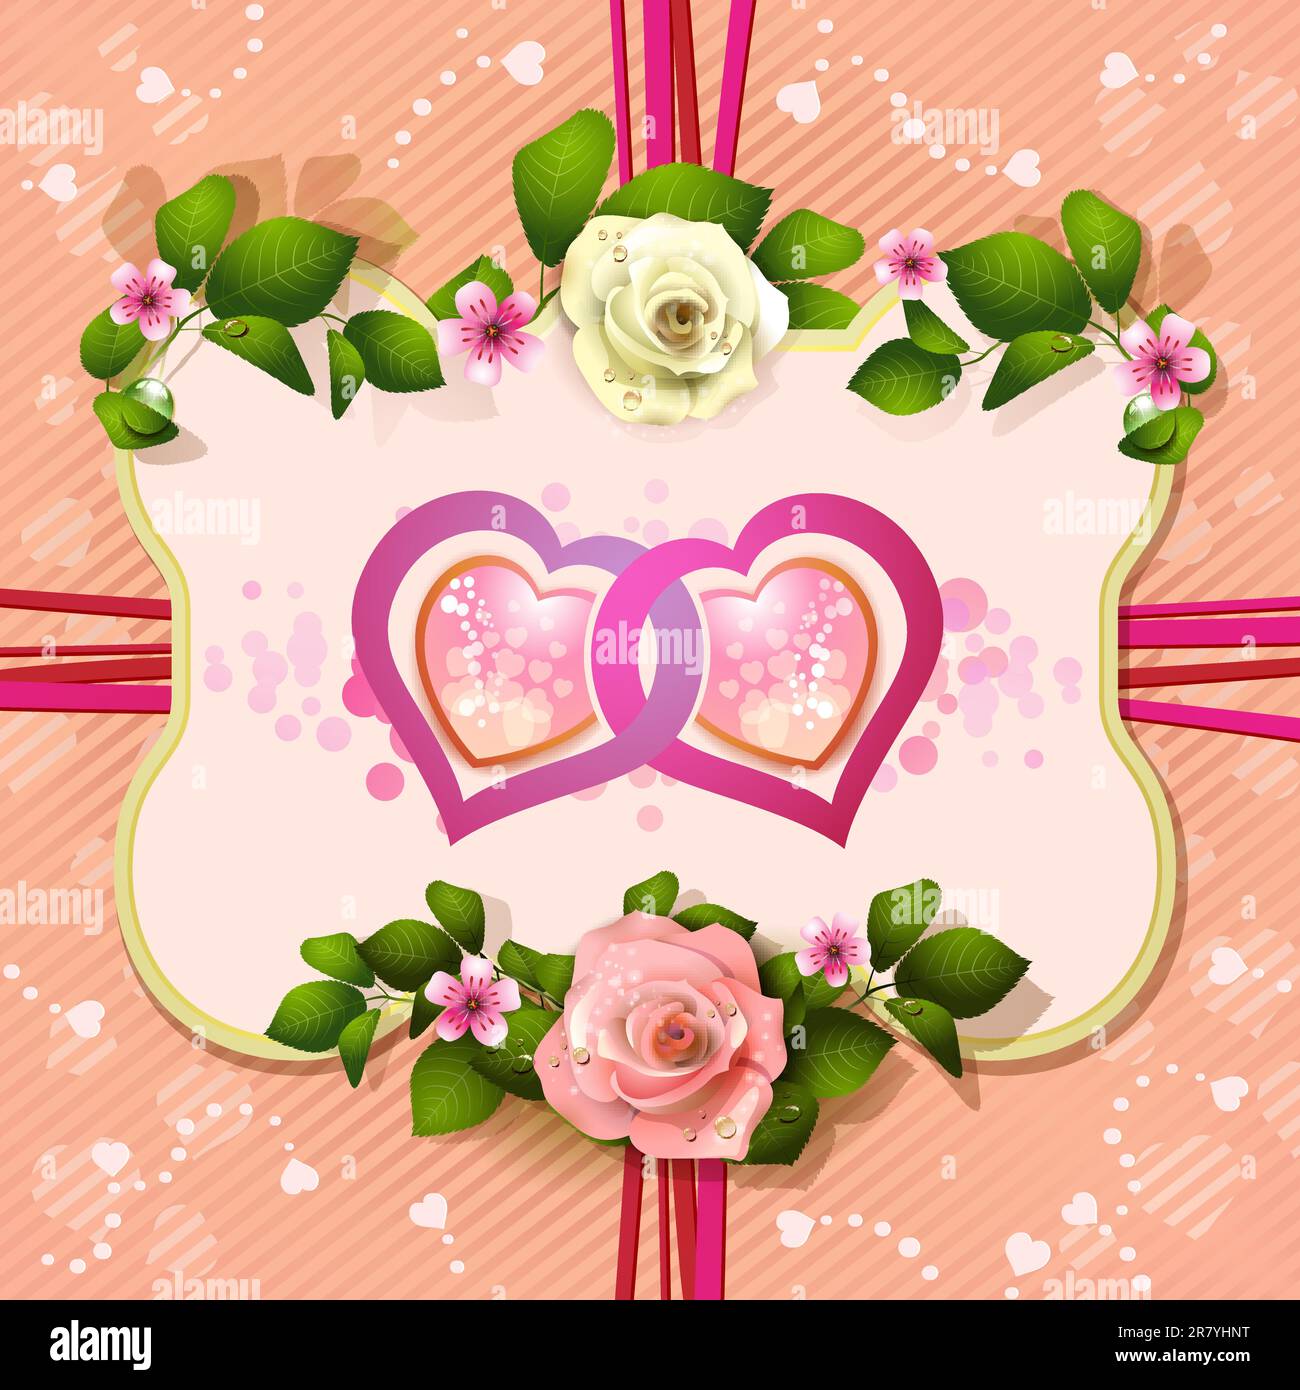 Hearts over mirror decorated with roses Stock Vector